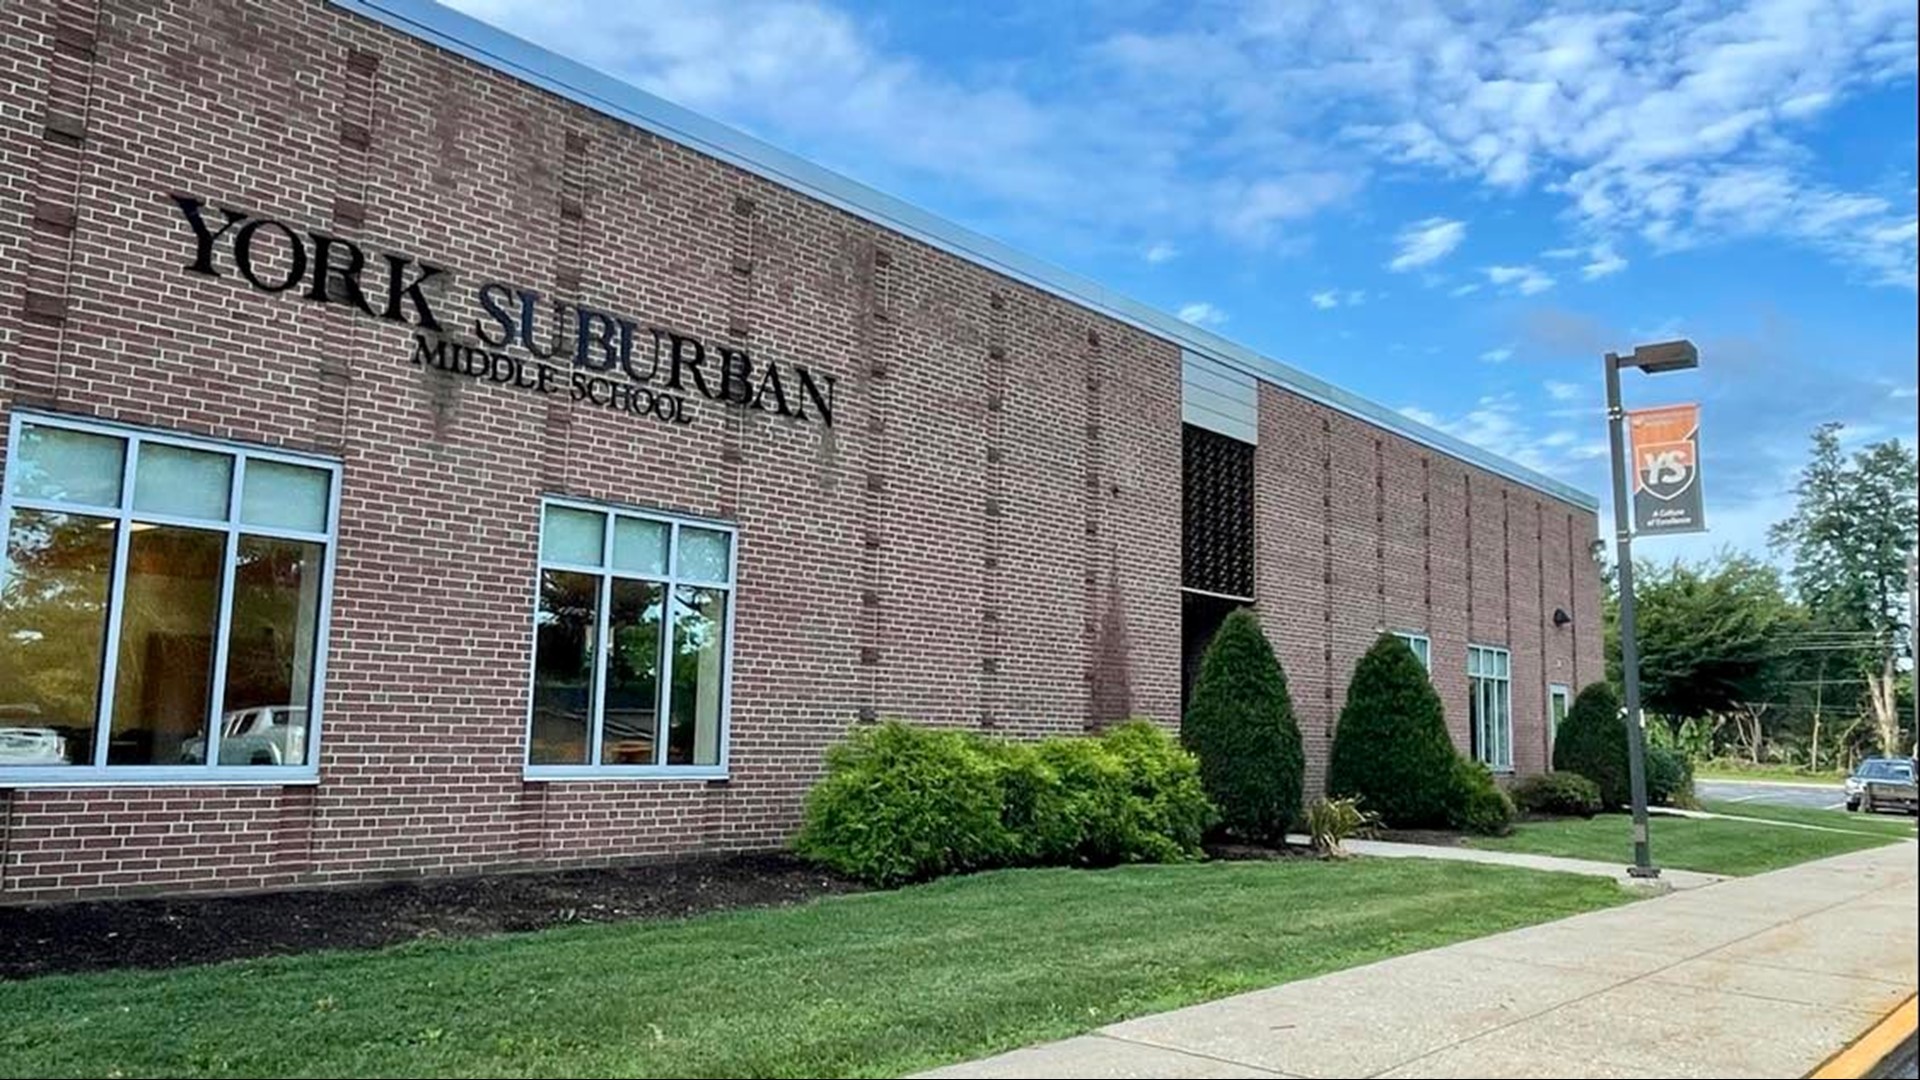 The job fair is scheduled from 11 a.m. to 2 p.m. in York Suburban Middle School's cafeteria. The school is located at 455 Sundale Drive in York.